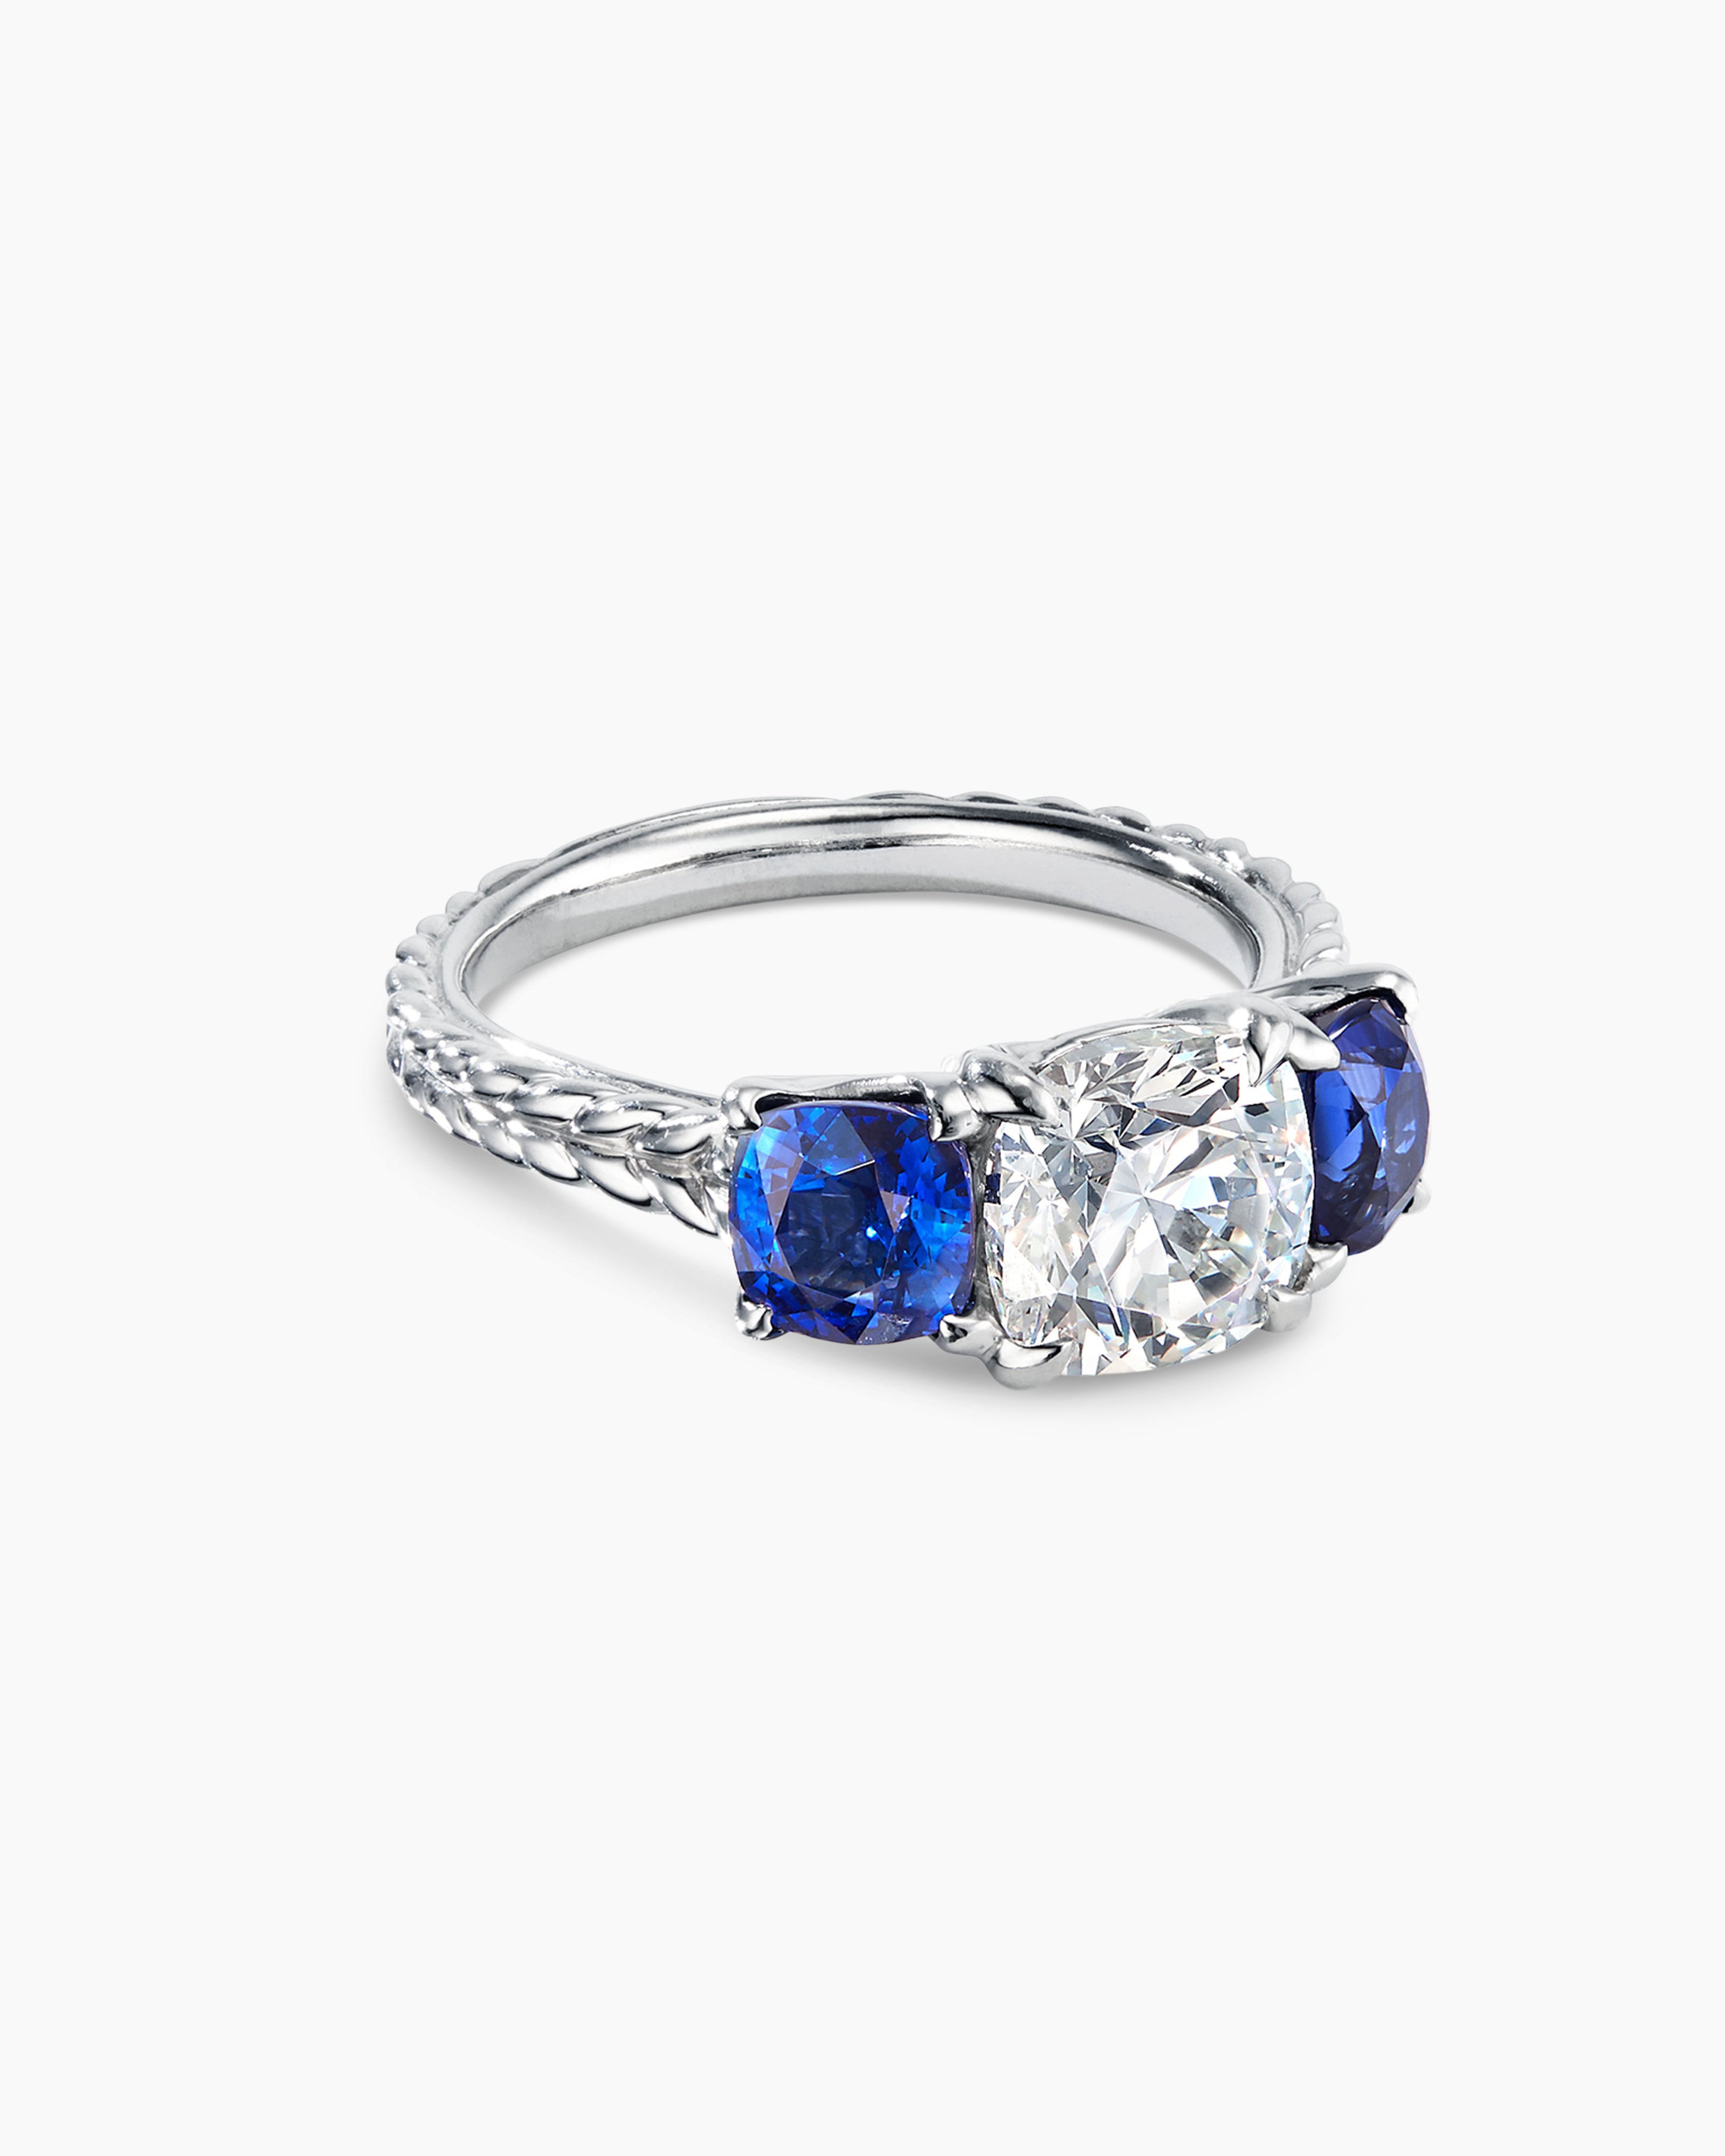 How to Clean Your Diamond And Sapphire Rings at Home